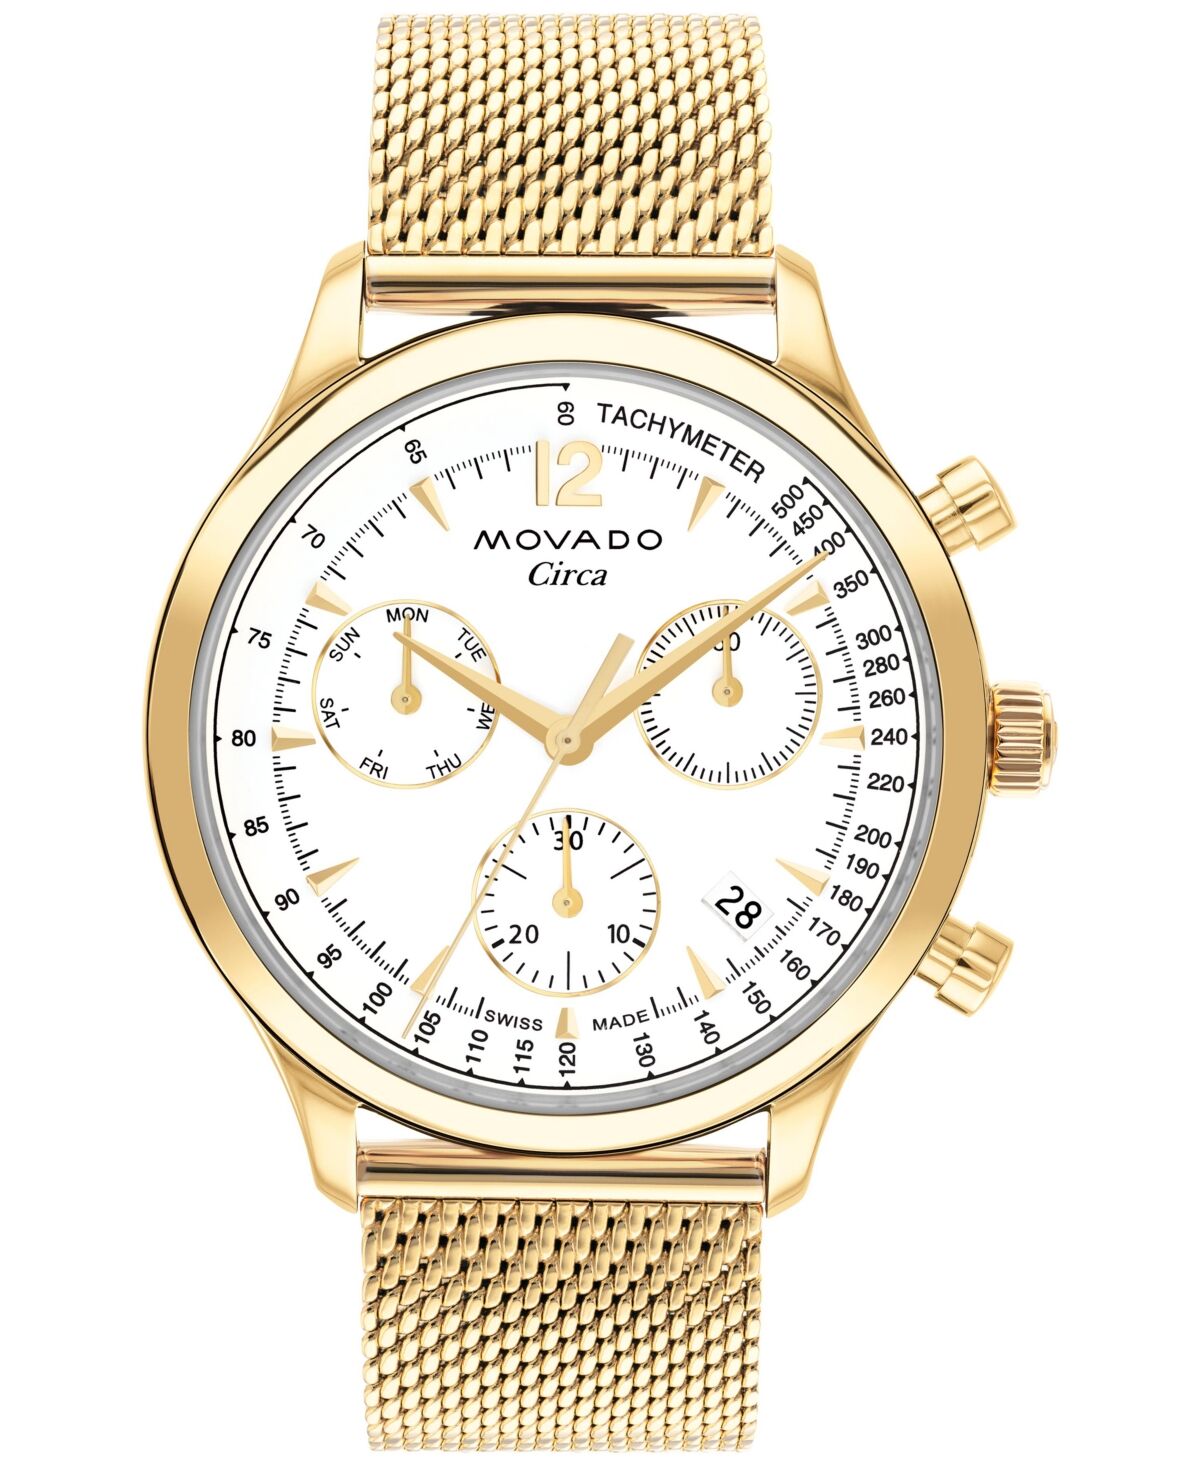 Movado Men's Swiss Chronograph Heritage Series Circa Gold Ion Plated Steel Mesh Bracelet Watch 43mm - Gold